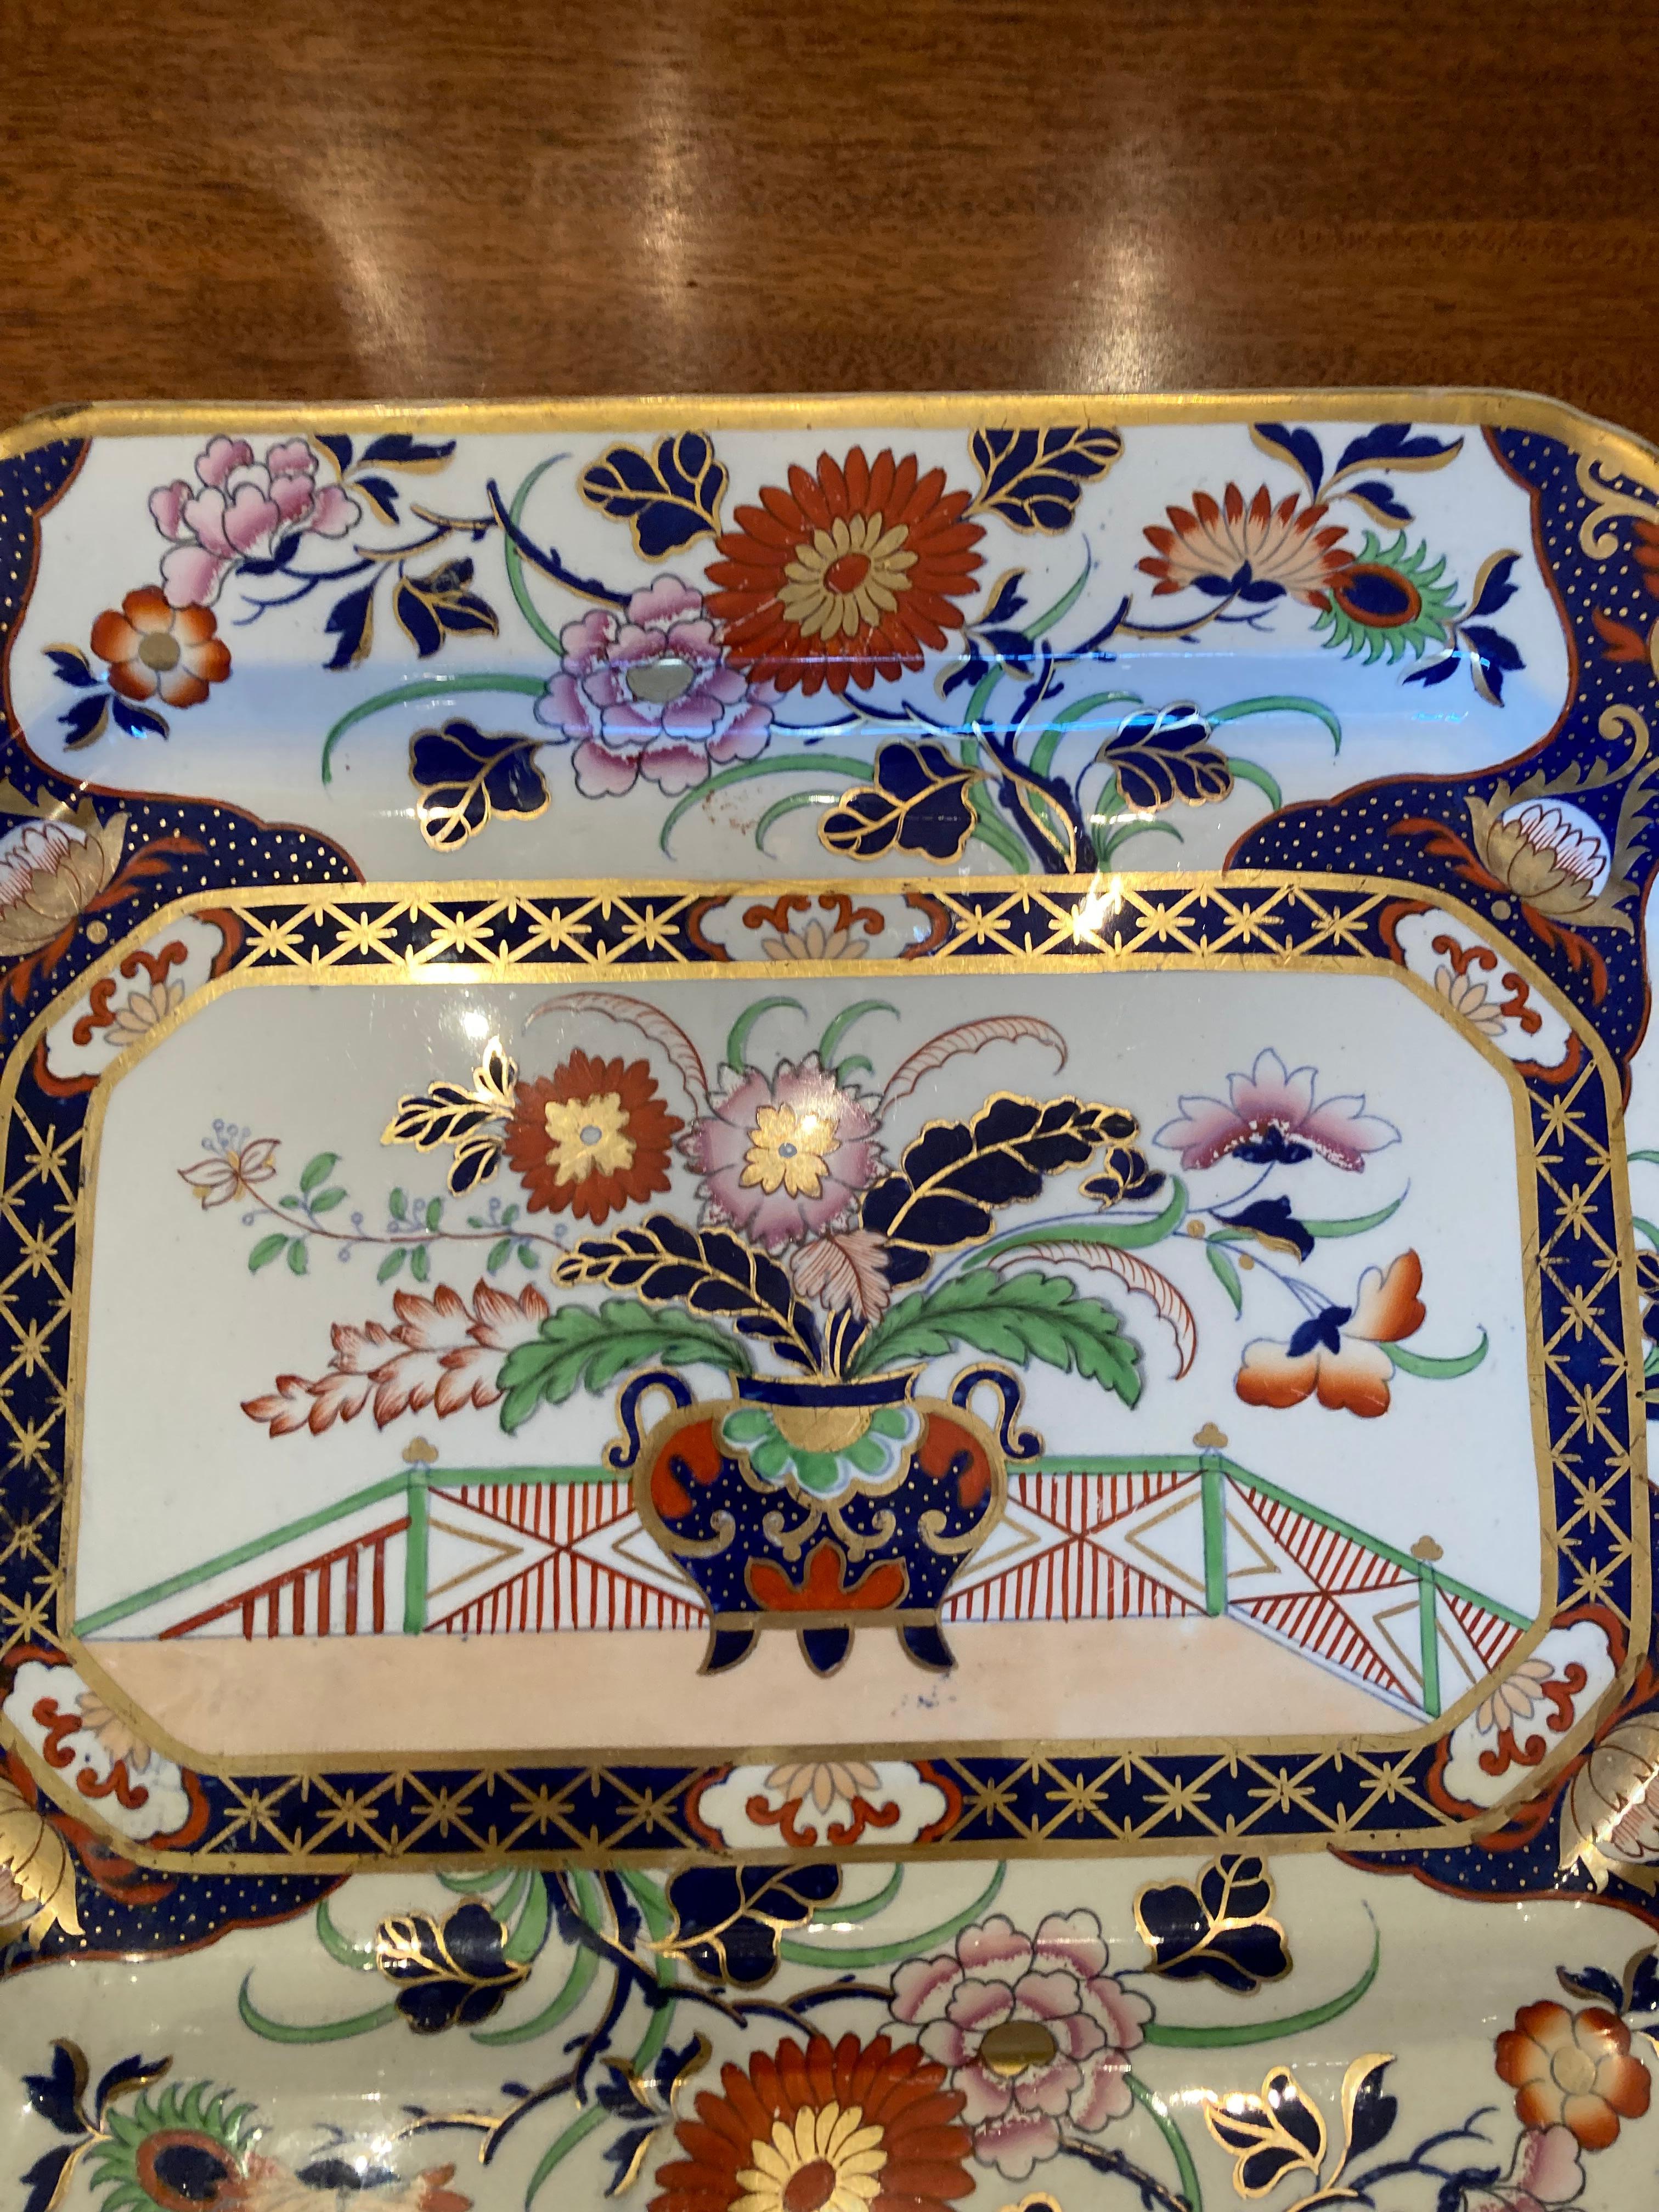 A fine Mid-19th Century Mason's English Stoneware platter with canted corners in a Imari Palette.